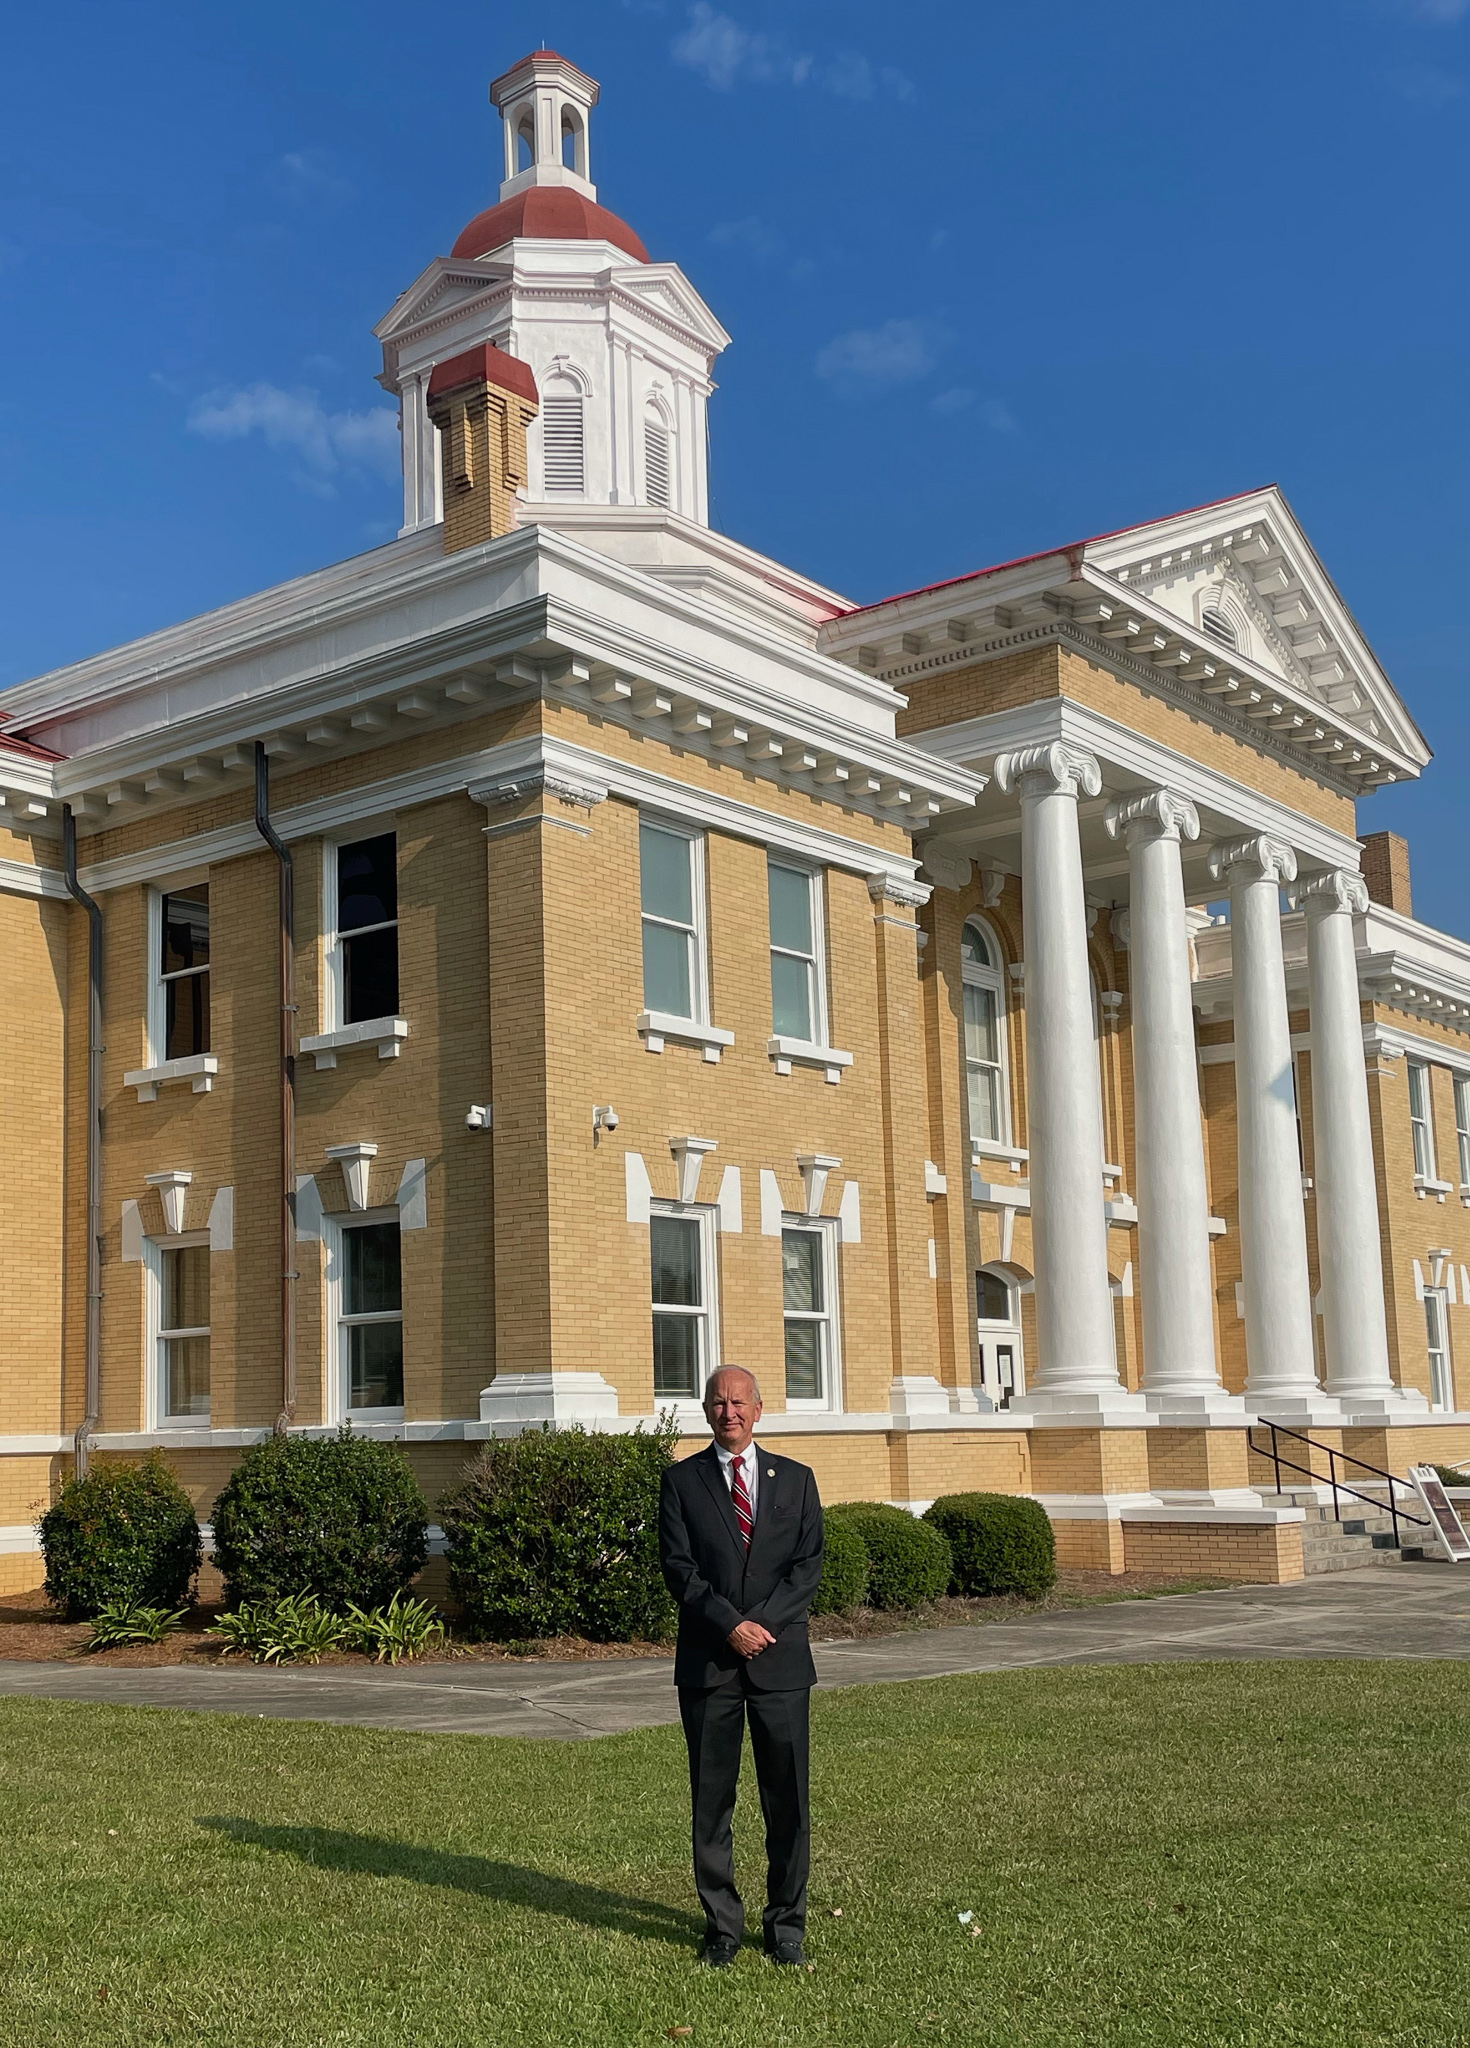 Chief Justice Paul Newby Continues 100 County Tour With Visit To Southeastern North Carolina North Carolina Judicial Branch